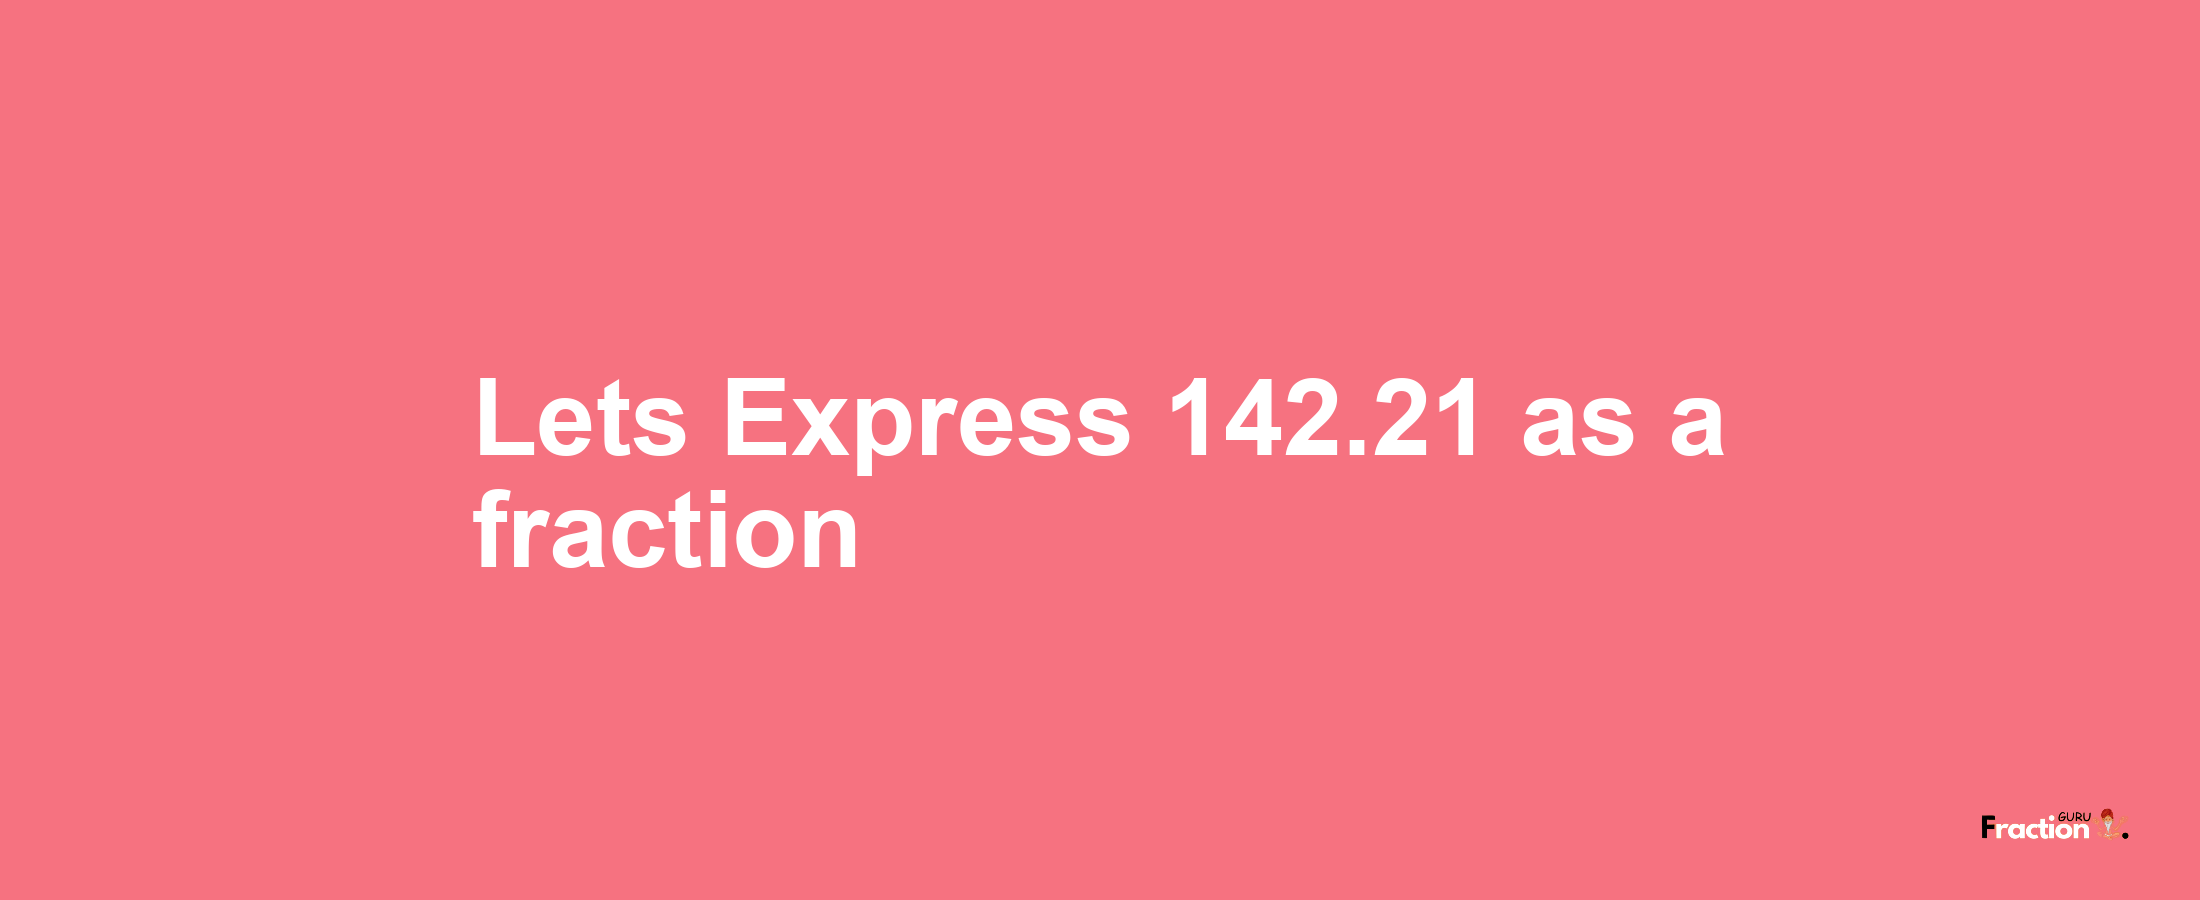 Lets Express 142.21 as afraction